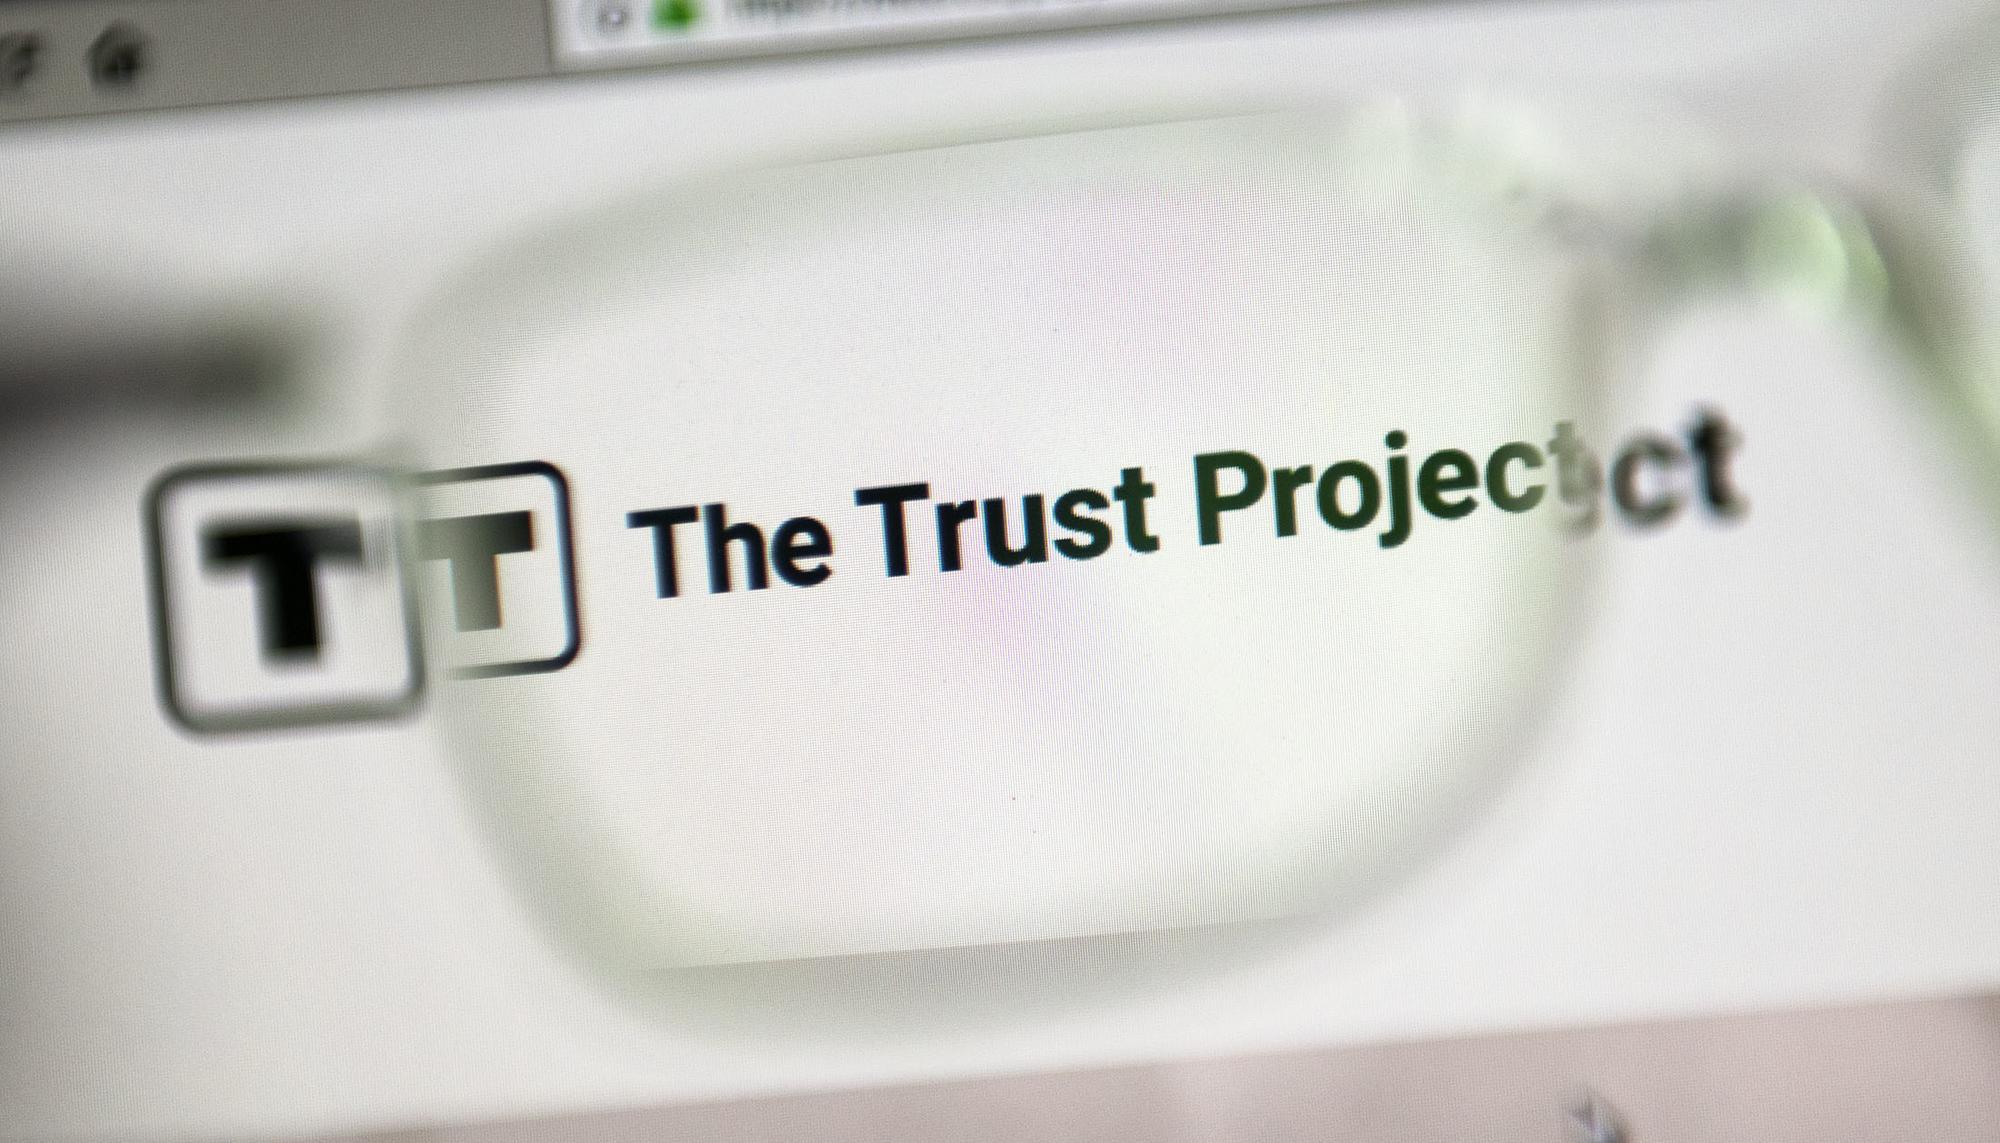  The Trust Project